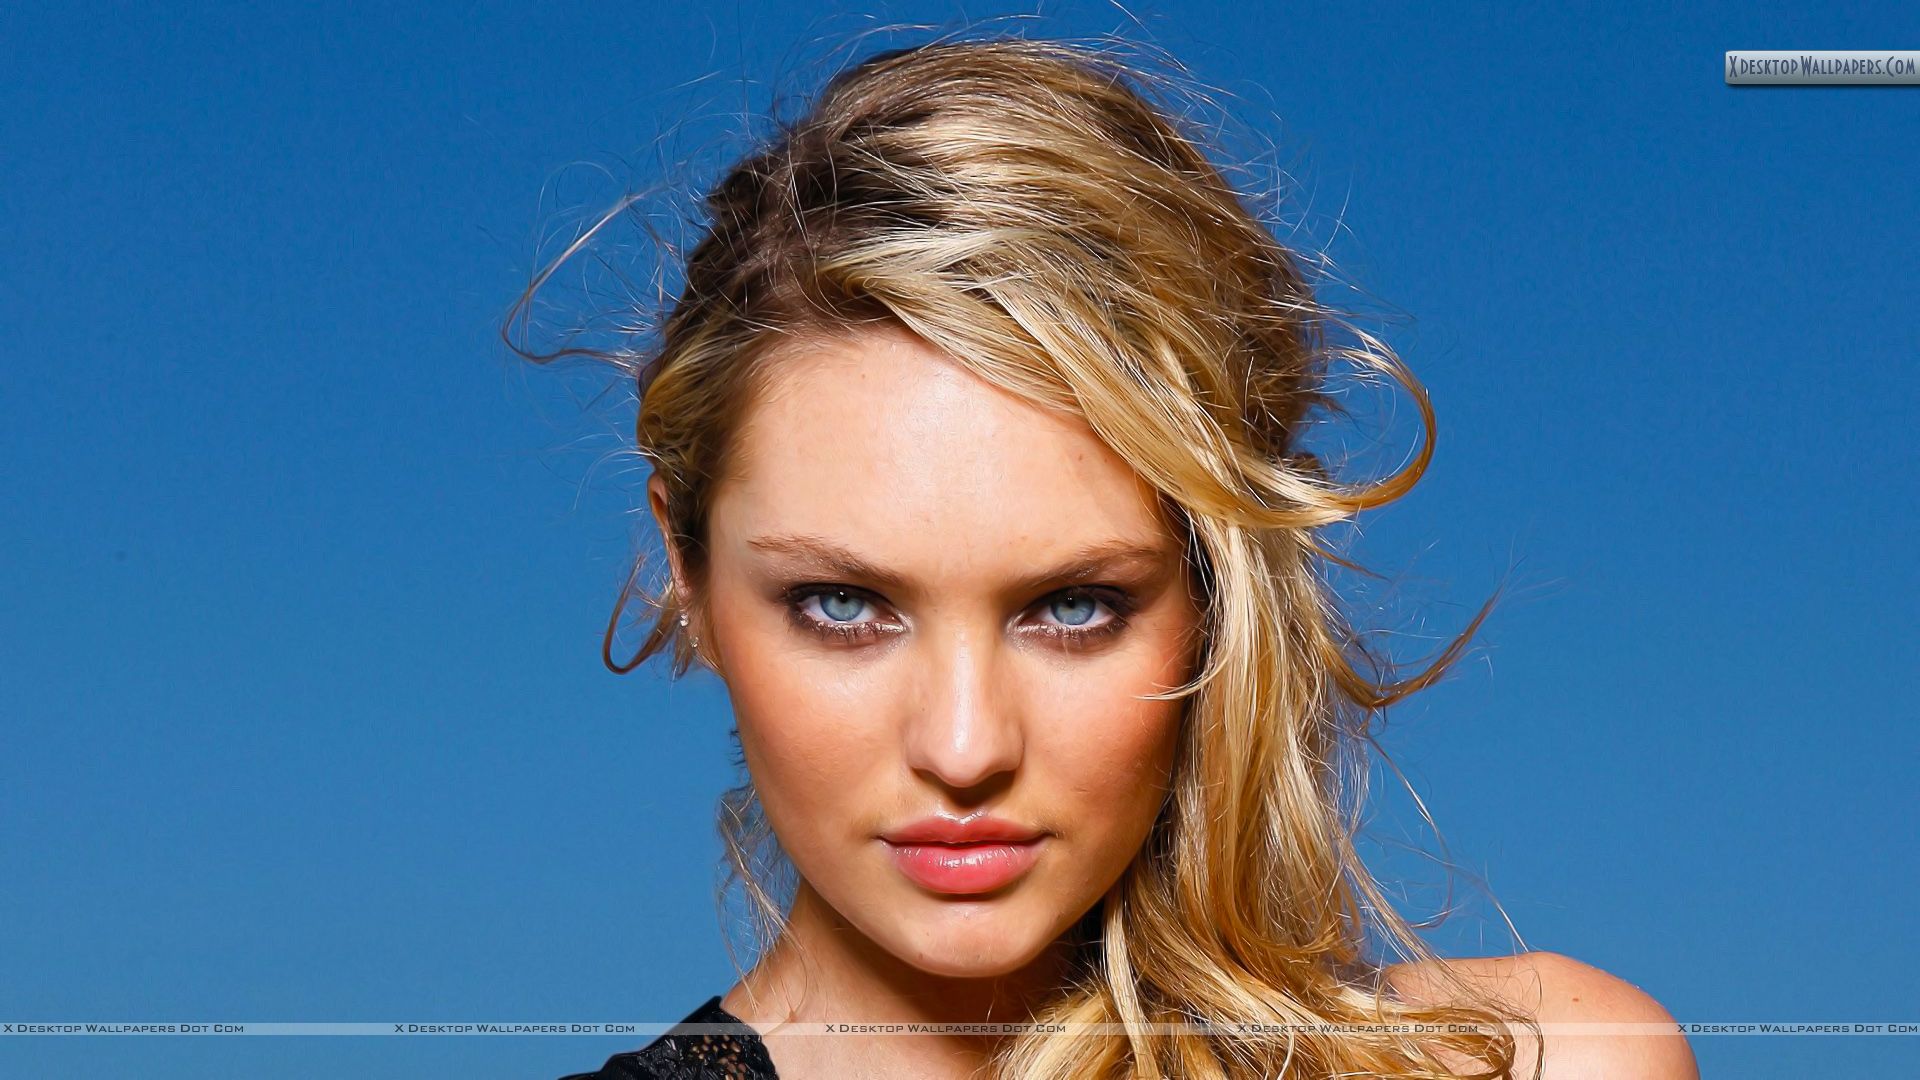 Candice Swanepoel Wallpaper Photos Image In HD